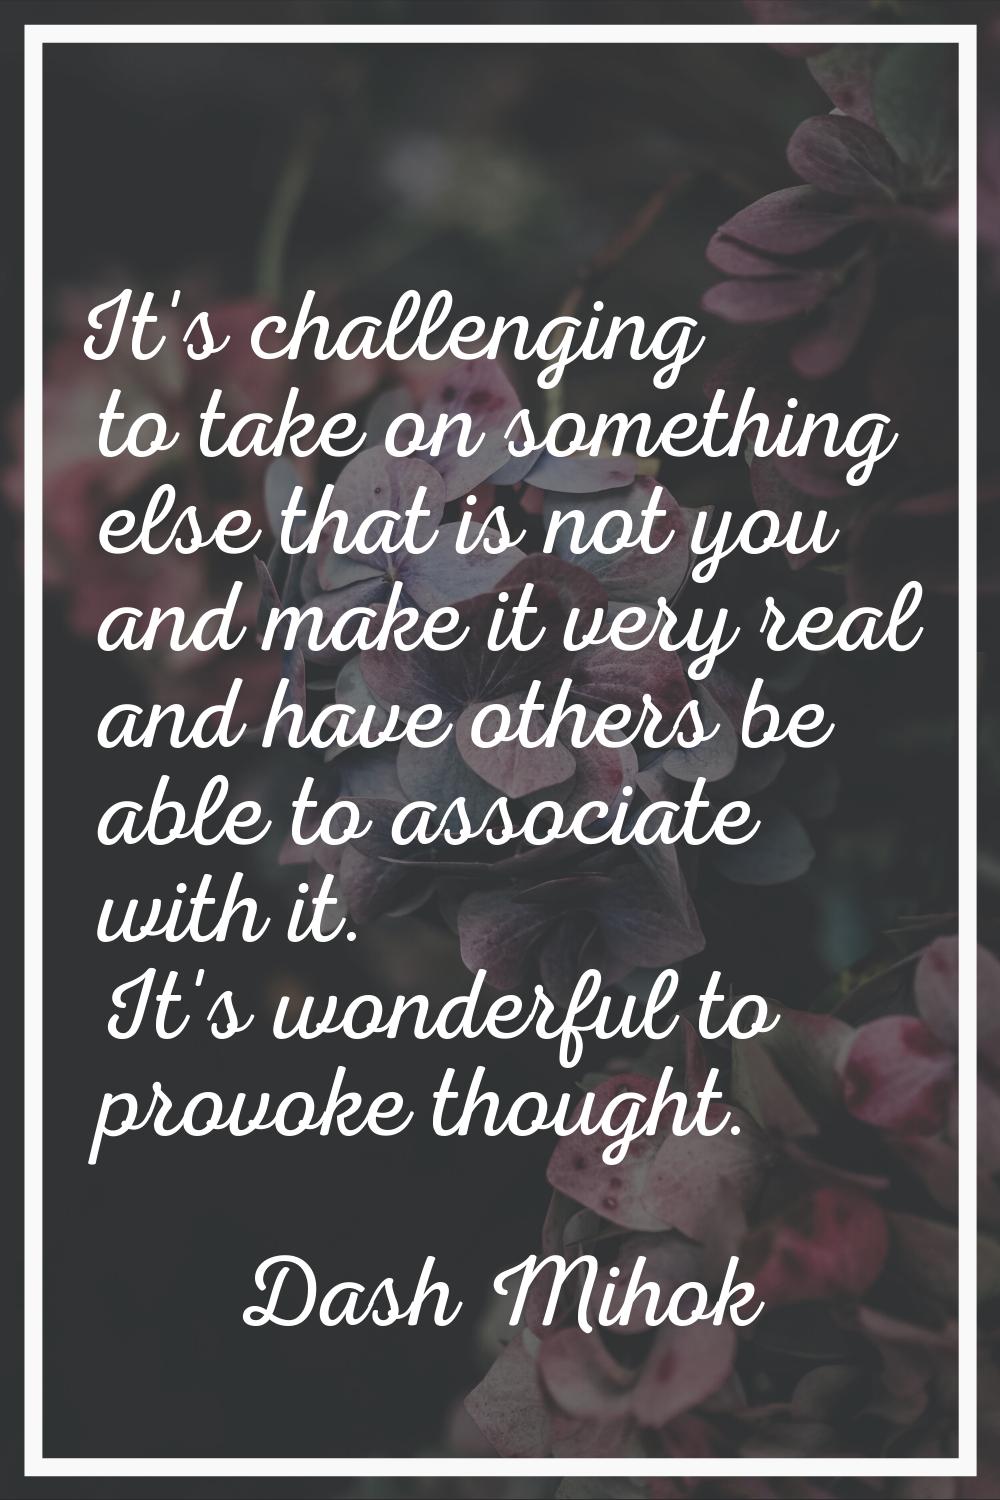 It's challenging to take on something else that is not you and make it very real and have others be